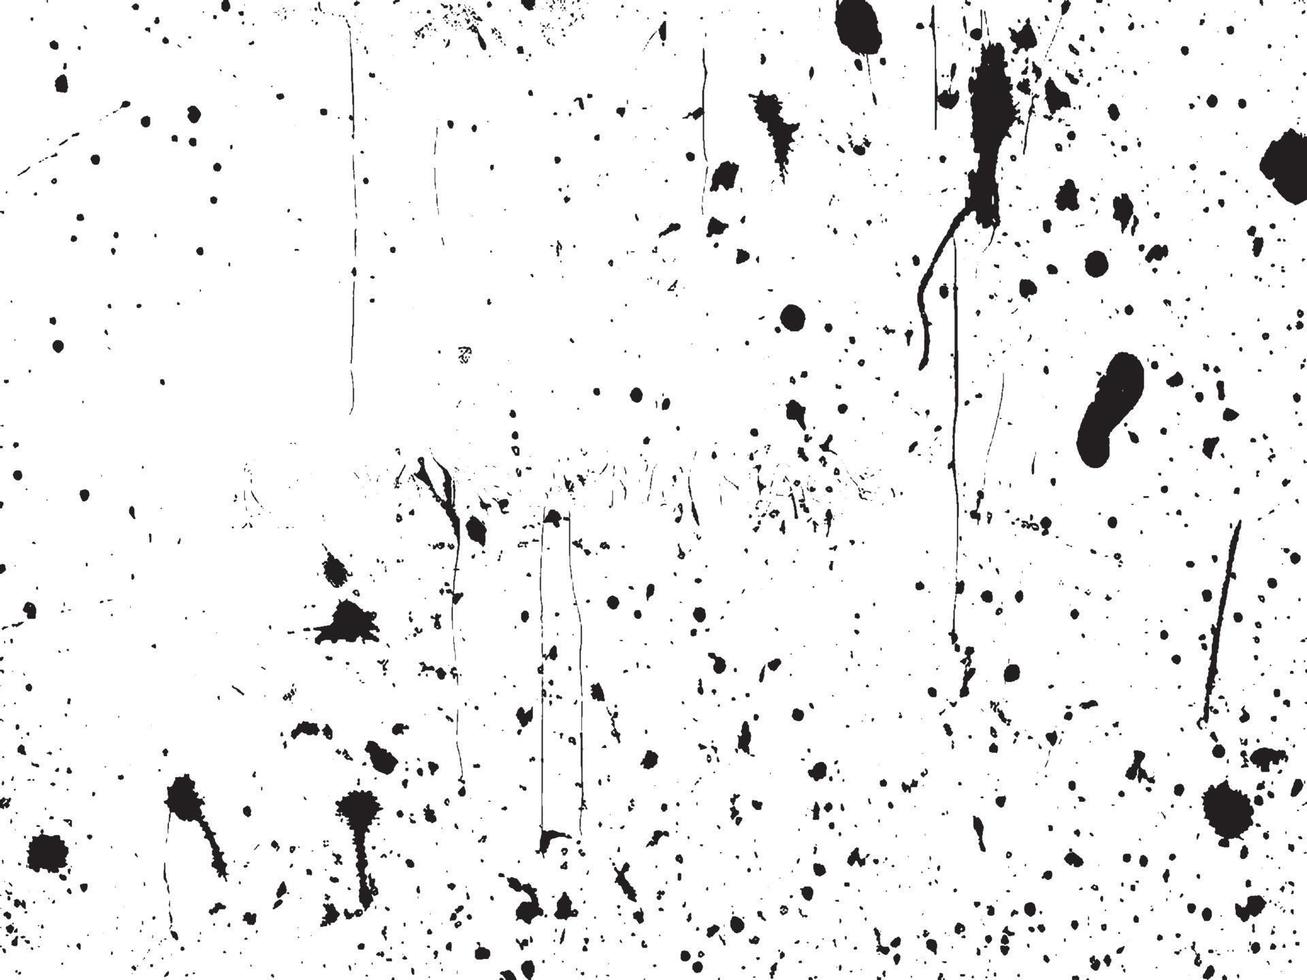 Black and White Grunge Texture Vector Background with Splatter and Scratch Effects. EPS 10.